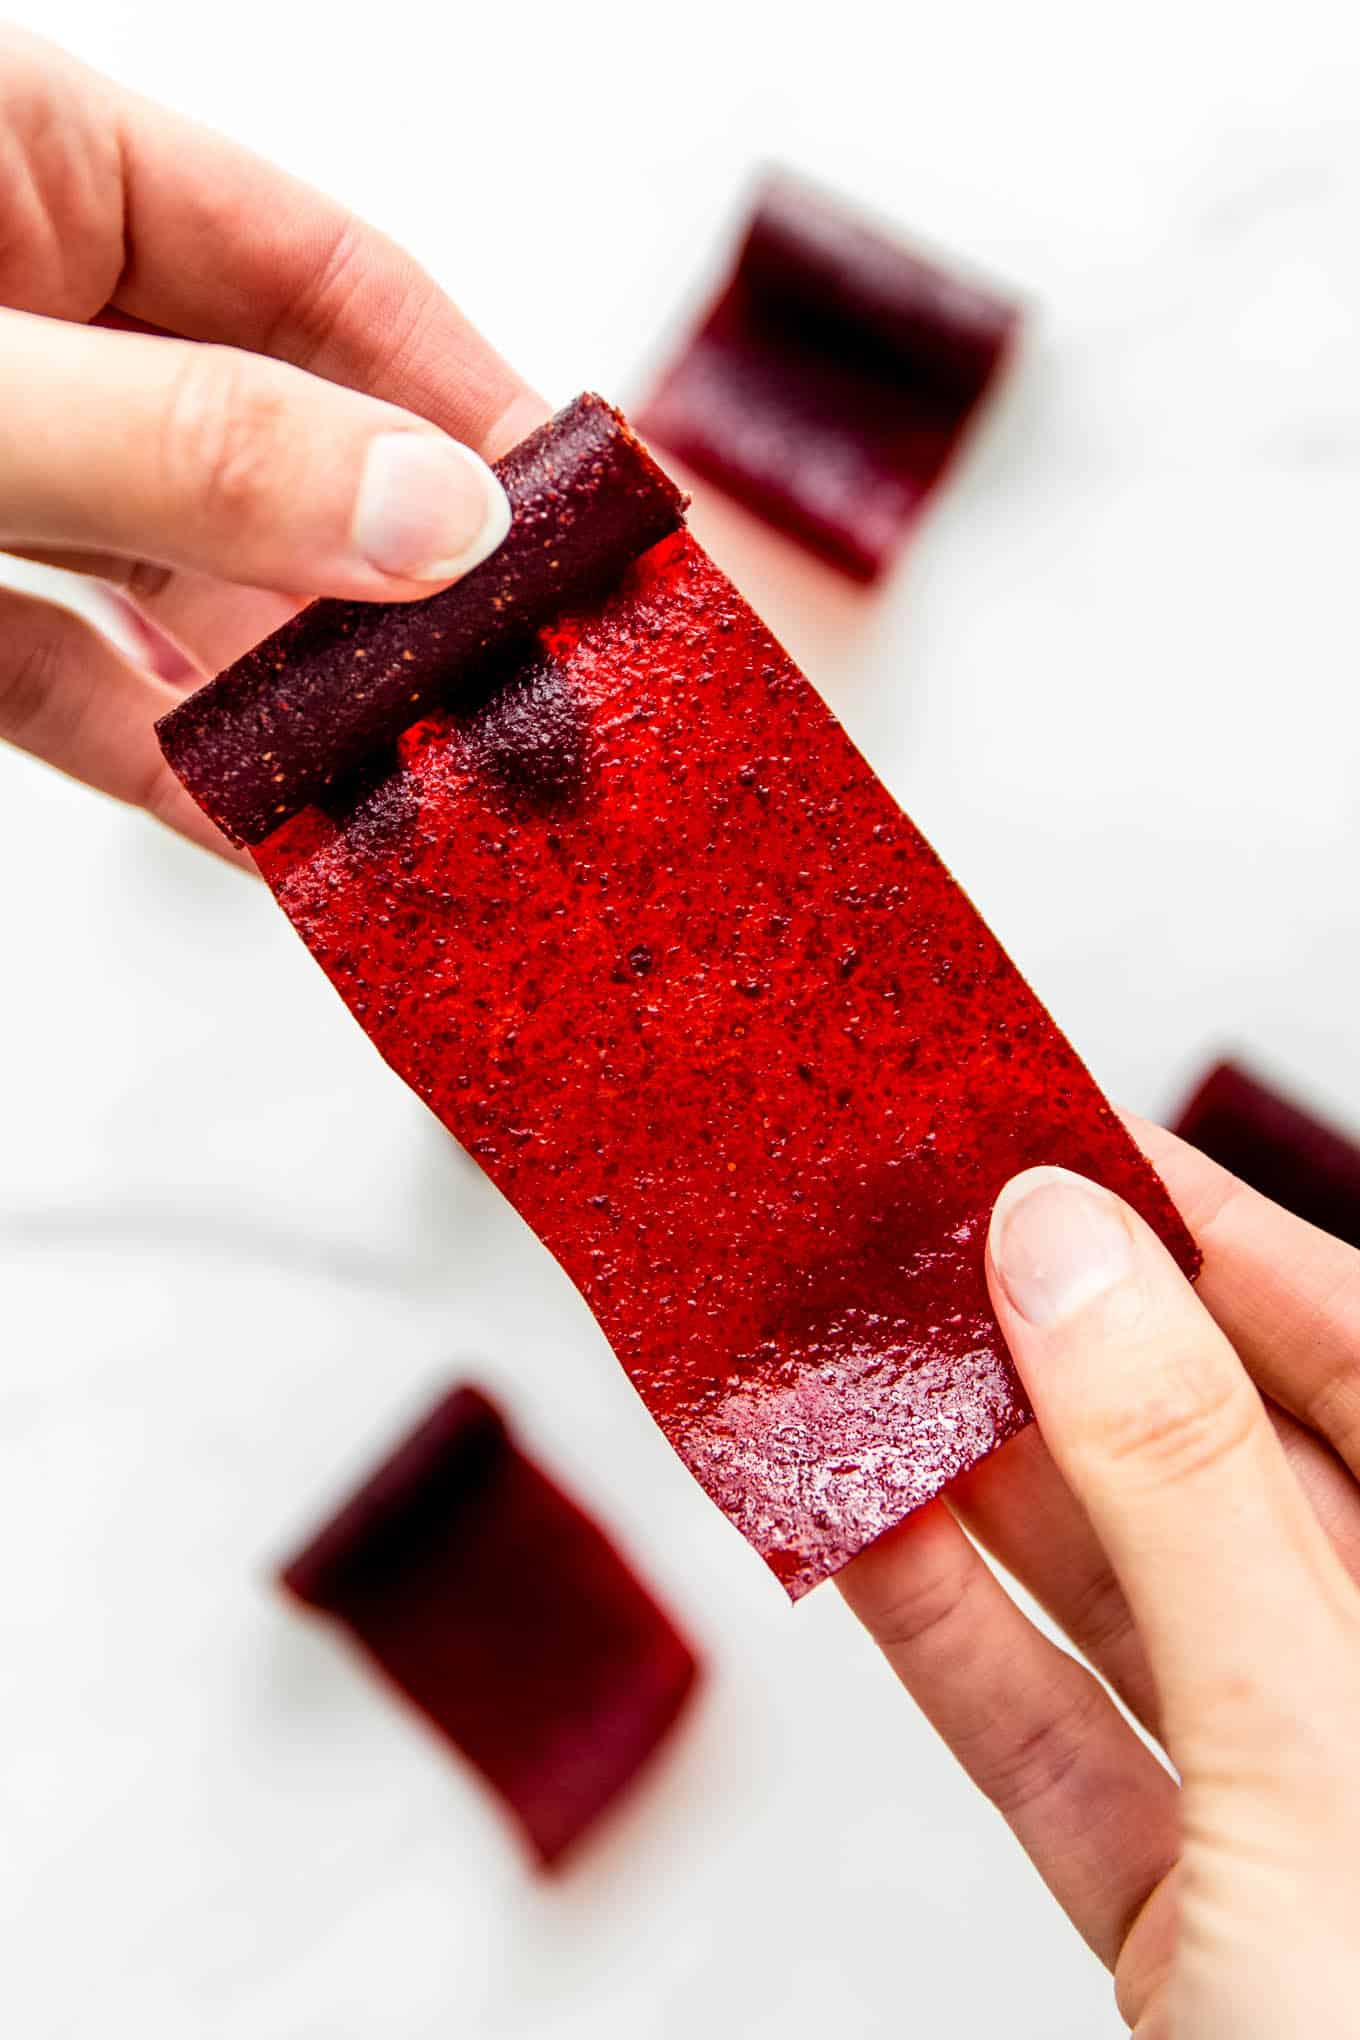 How to Make Fruit Leather  Homemade Fruit Roll-Ups - MOMables